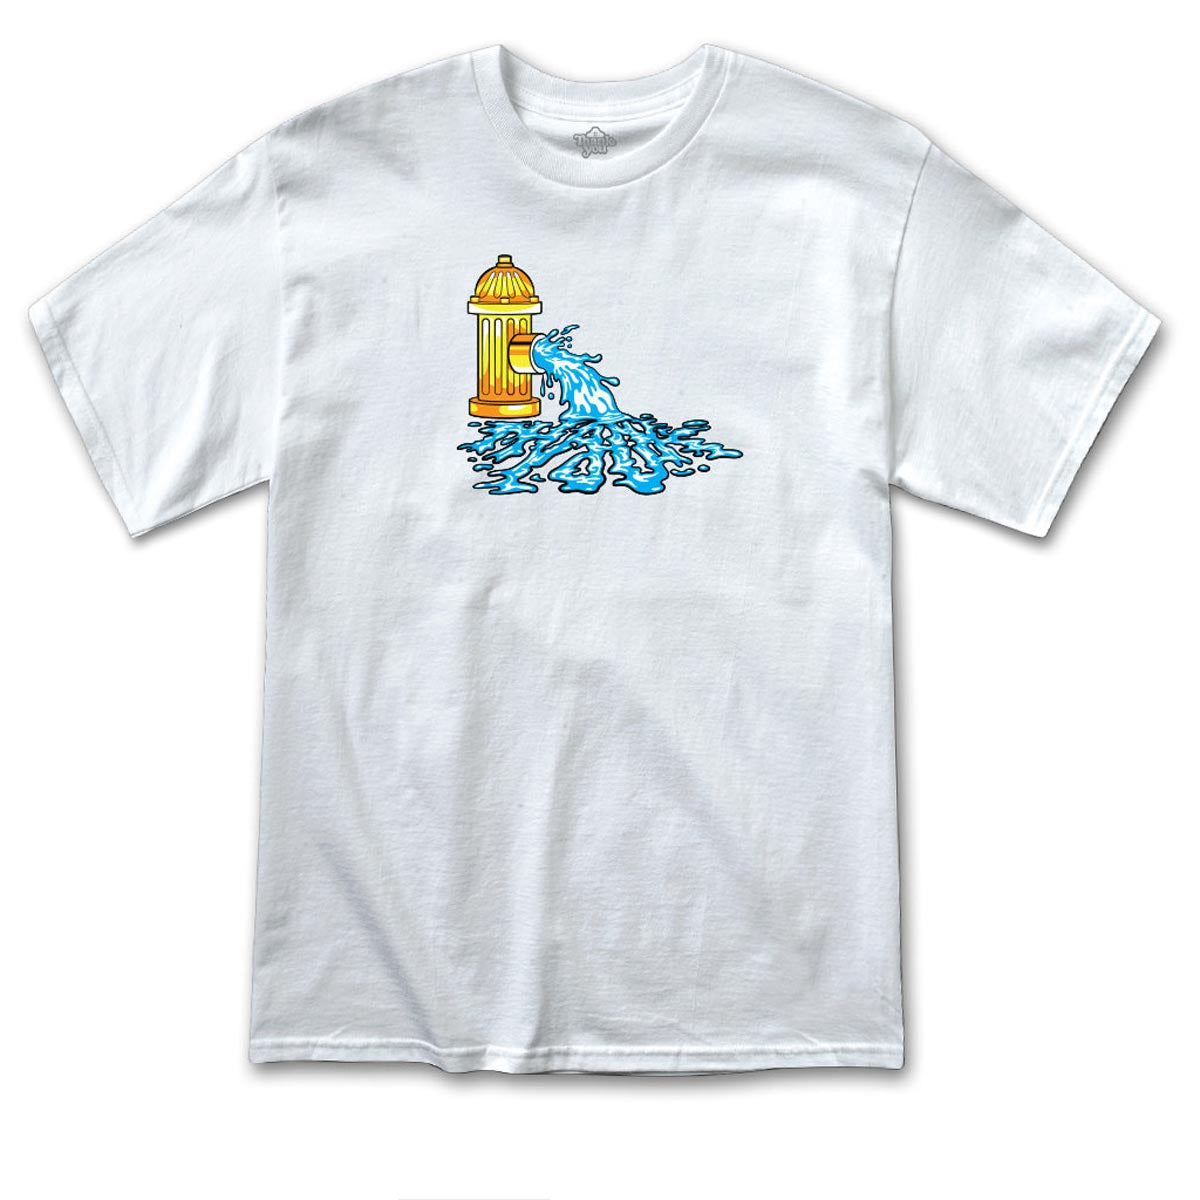 Thank You Fire Hydrant T-Shirt - White image 1